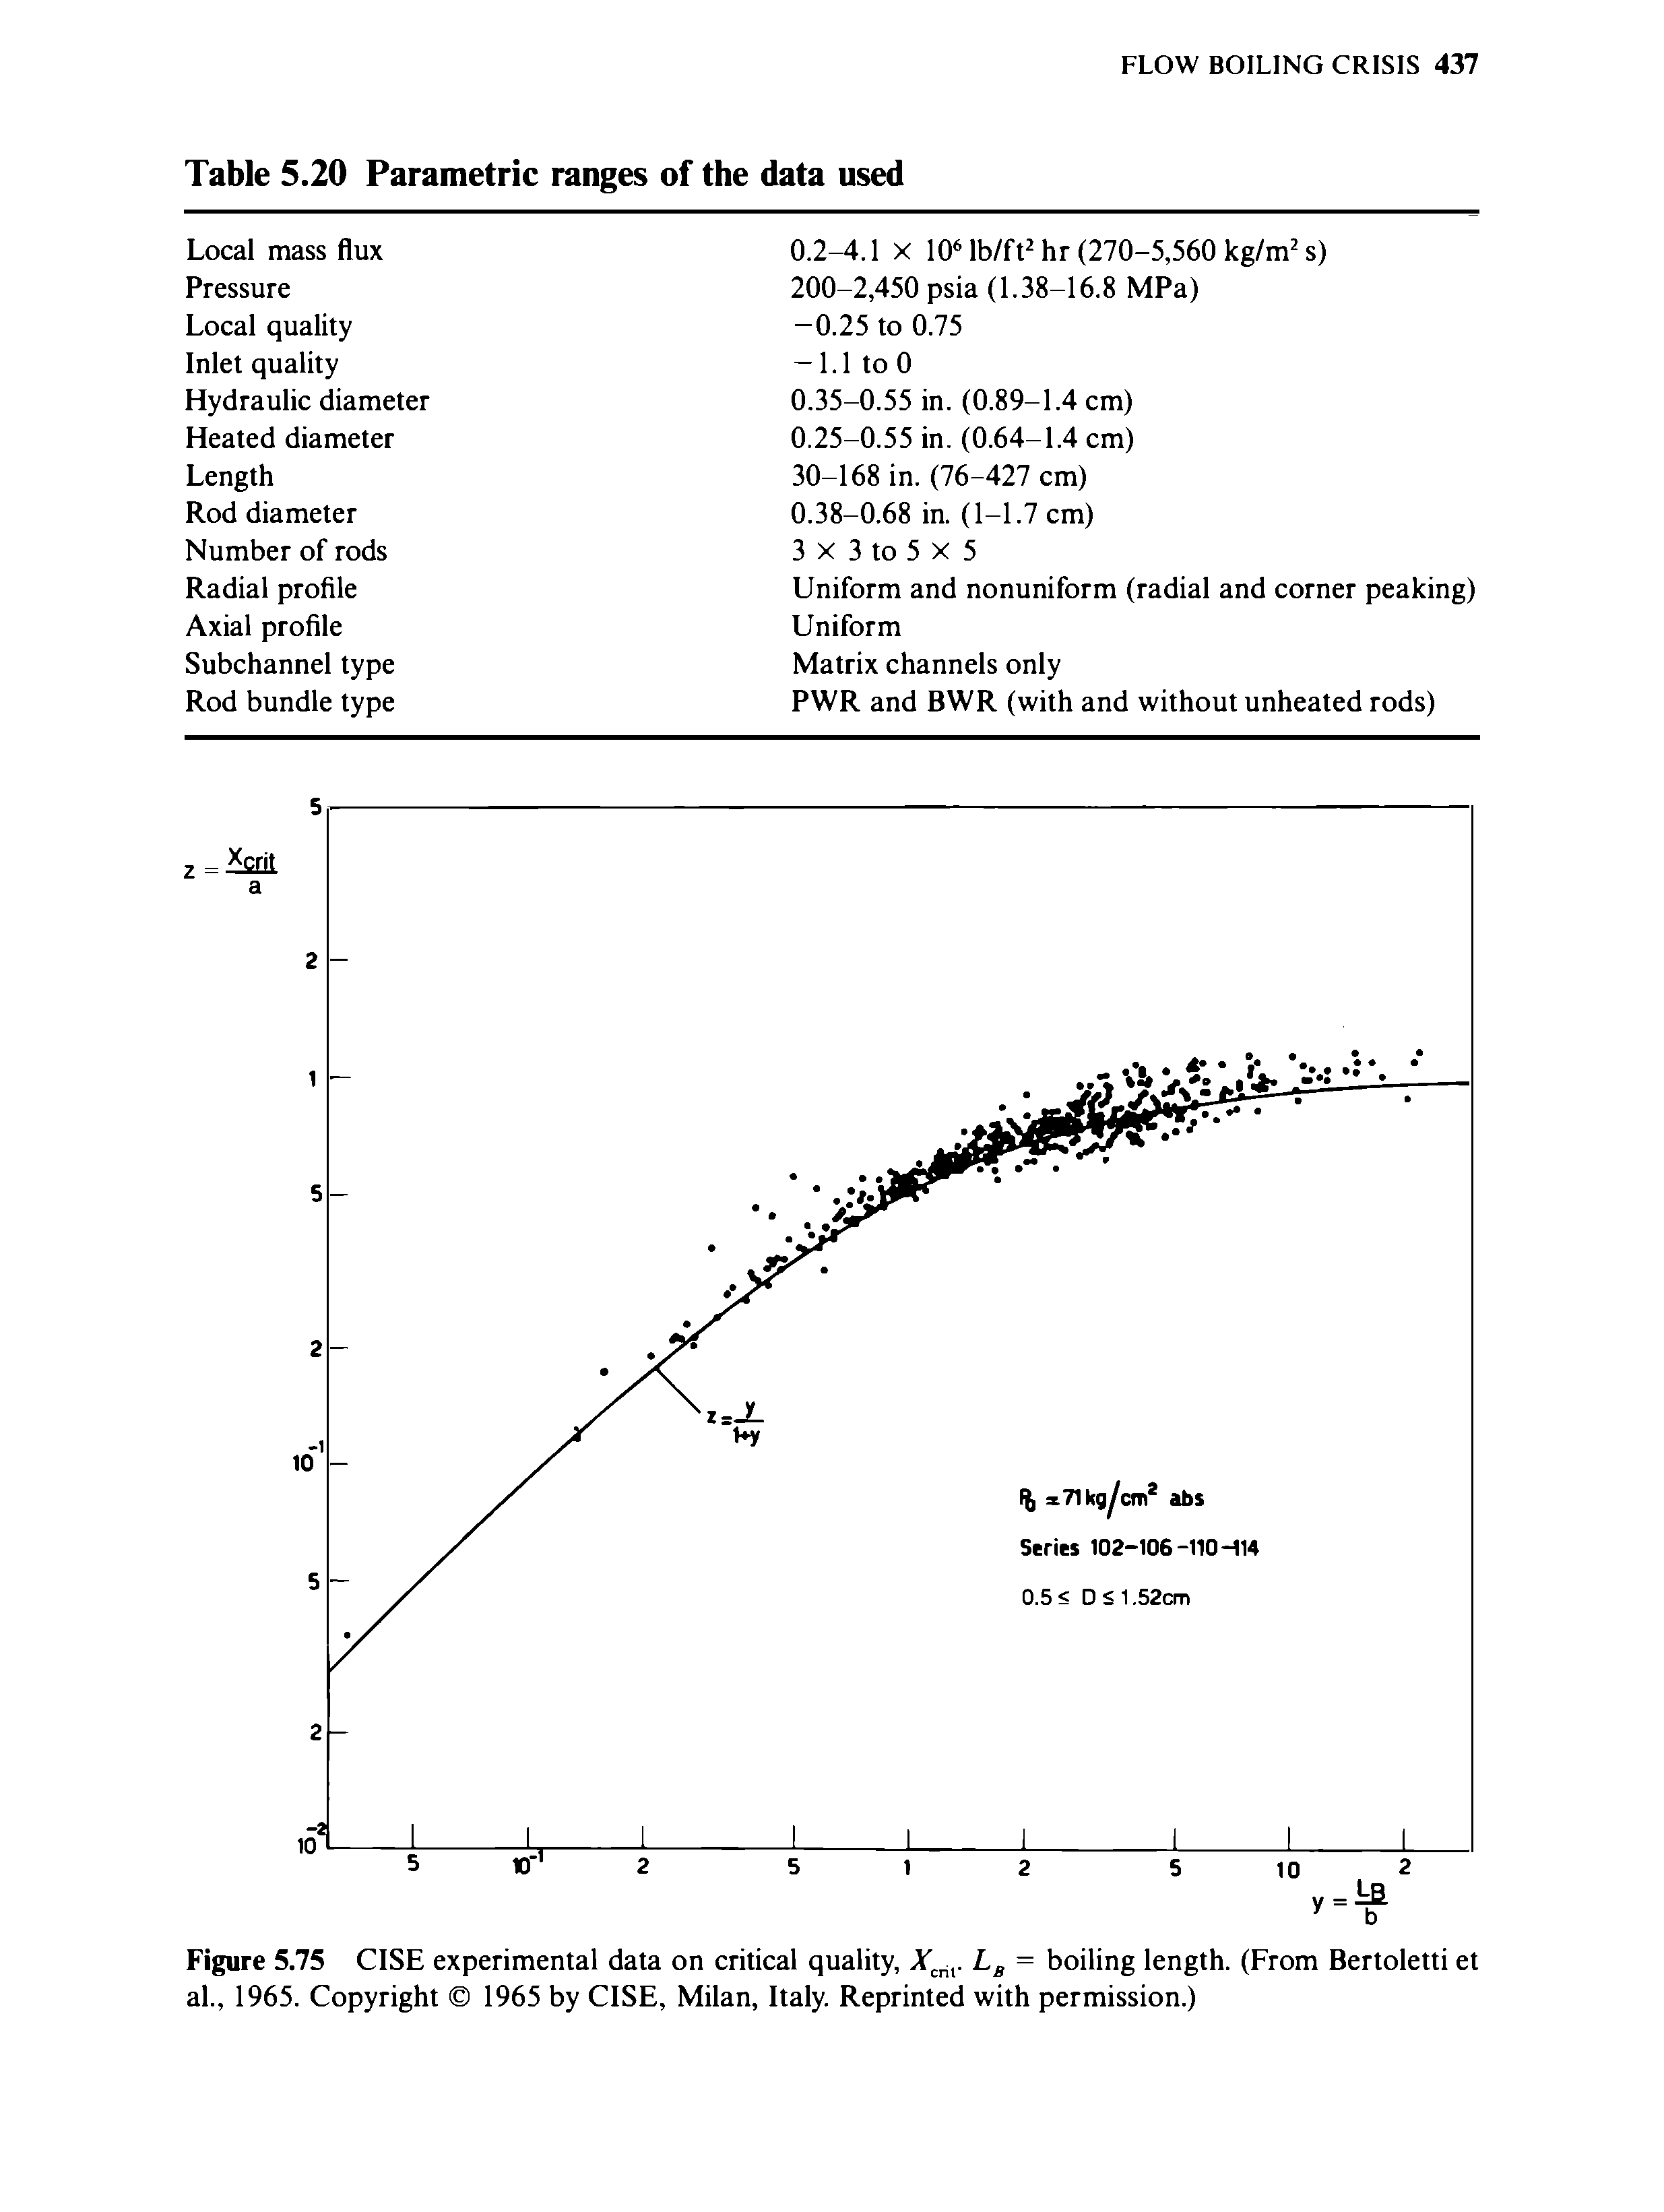 Figure 5.75 CISE experimental data on critical quality, Xcnl. LB = boiling length. (From Bertoletti et al., 1965. Copyright 1965 by CISE, Milan, Italy. Reprinted with permission.)...